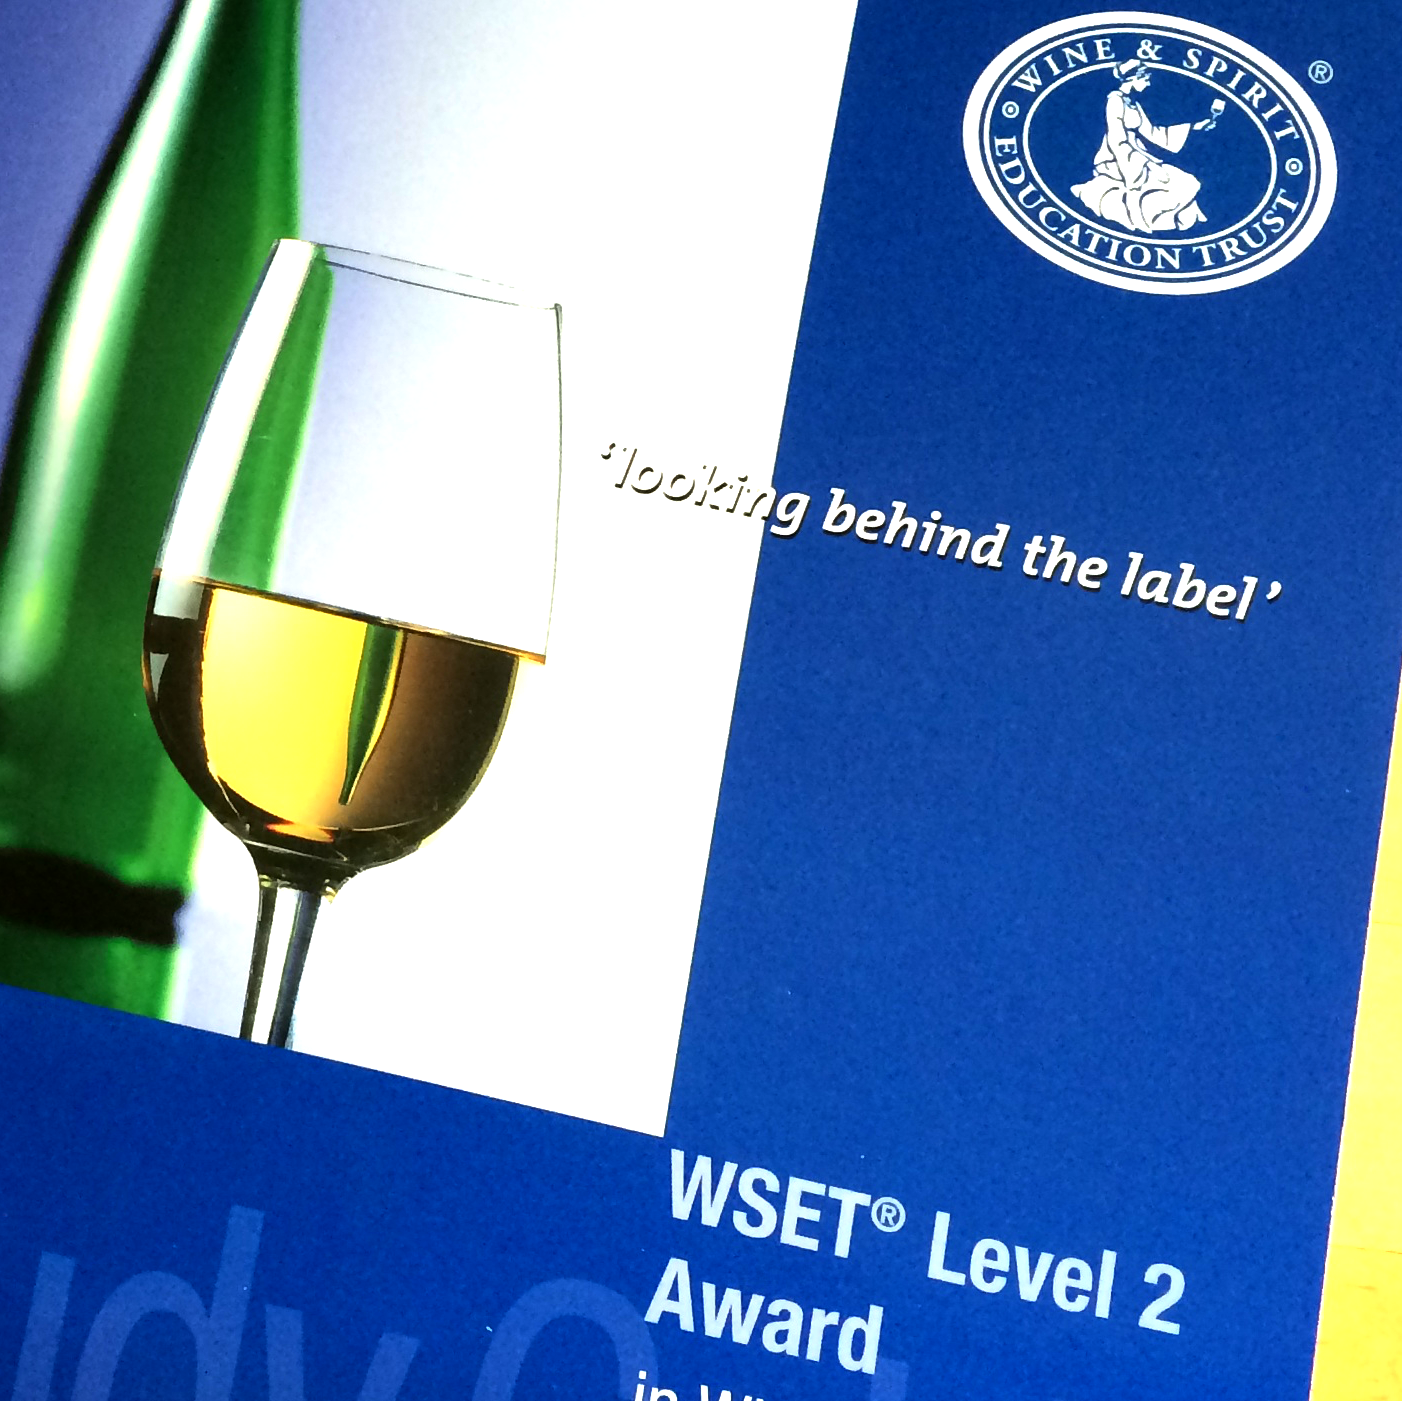 WSET Level 2 by Grape Experience - Certification Program